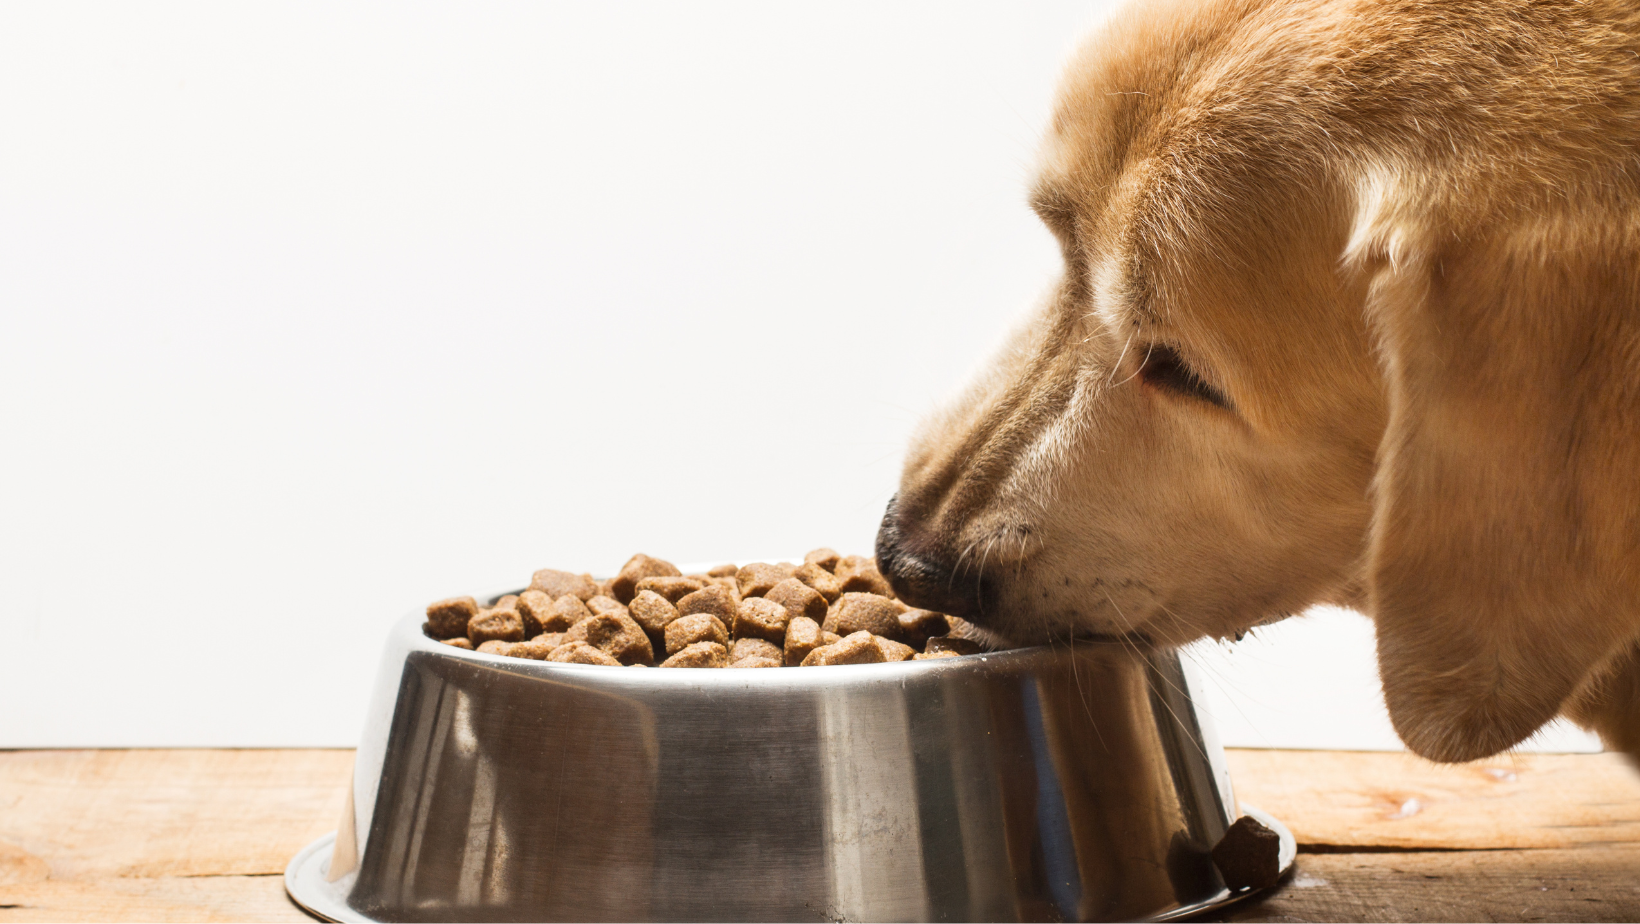 How Does one Identify When a Dog has Gorged on Dry Food?